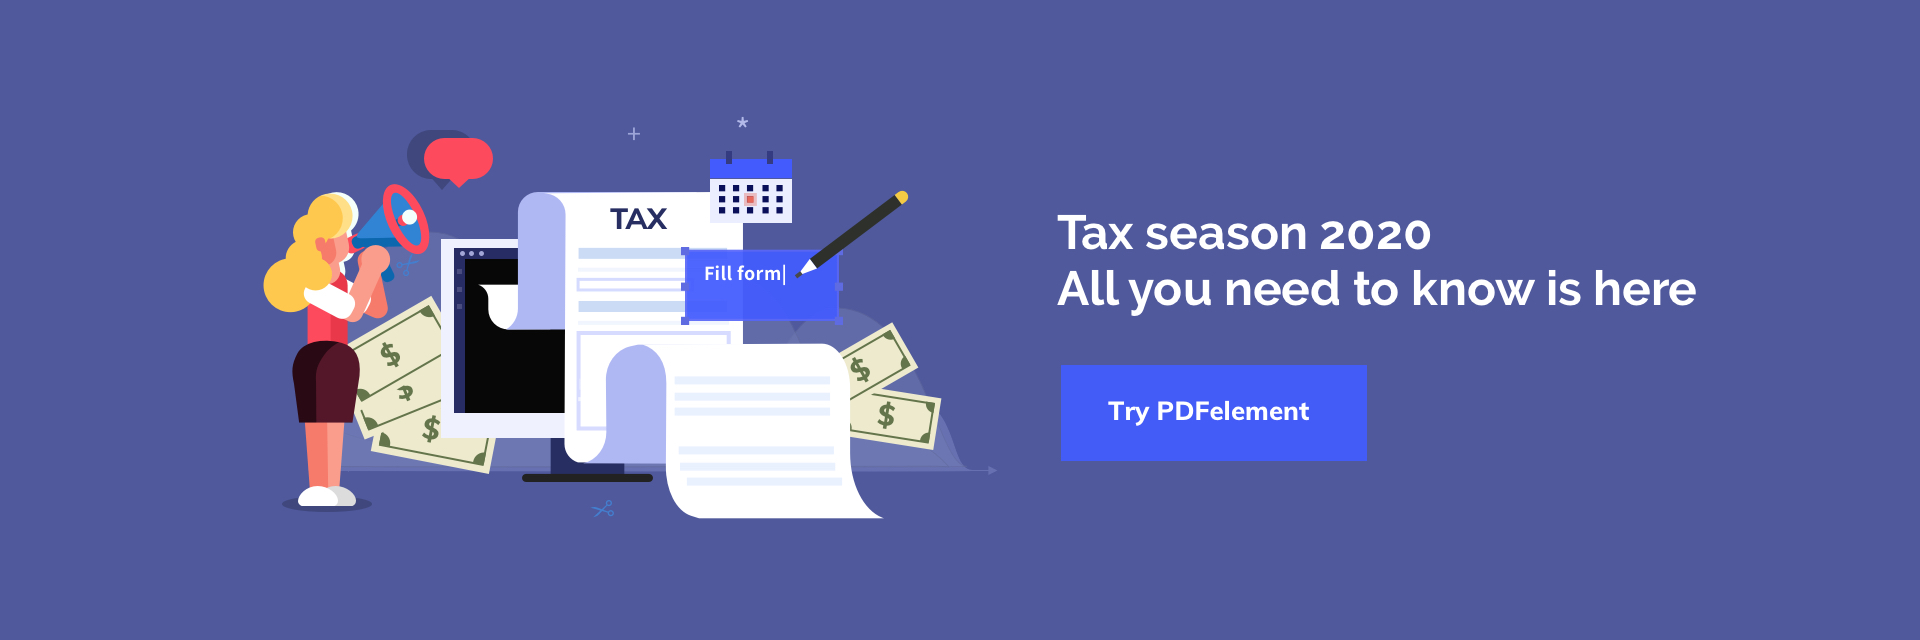 Tax Season 2020 All You Should Know Is Here